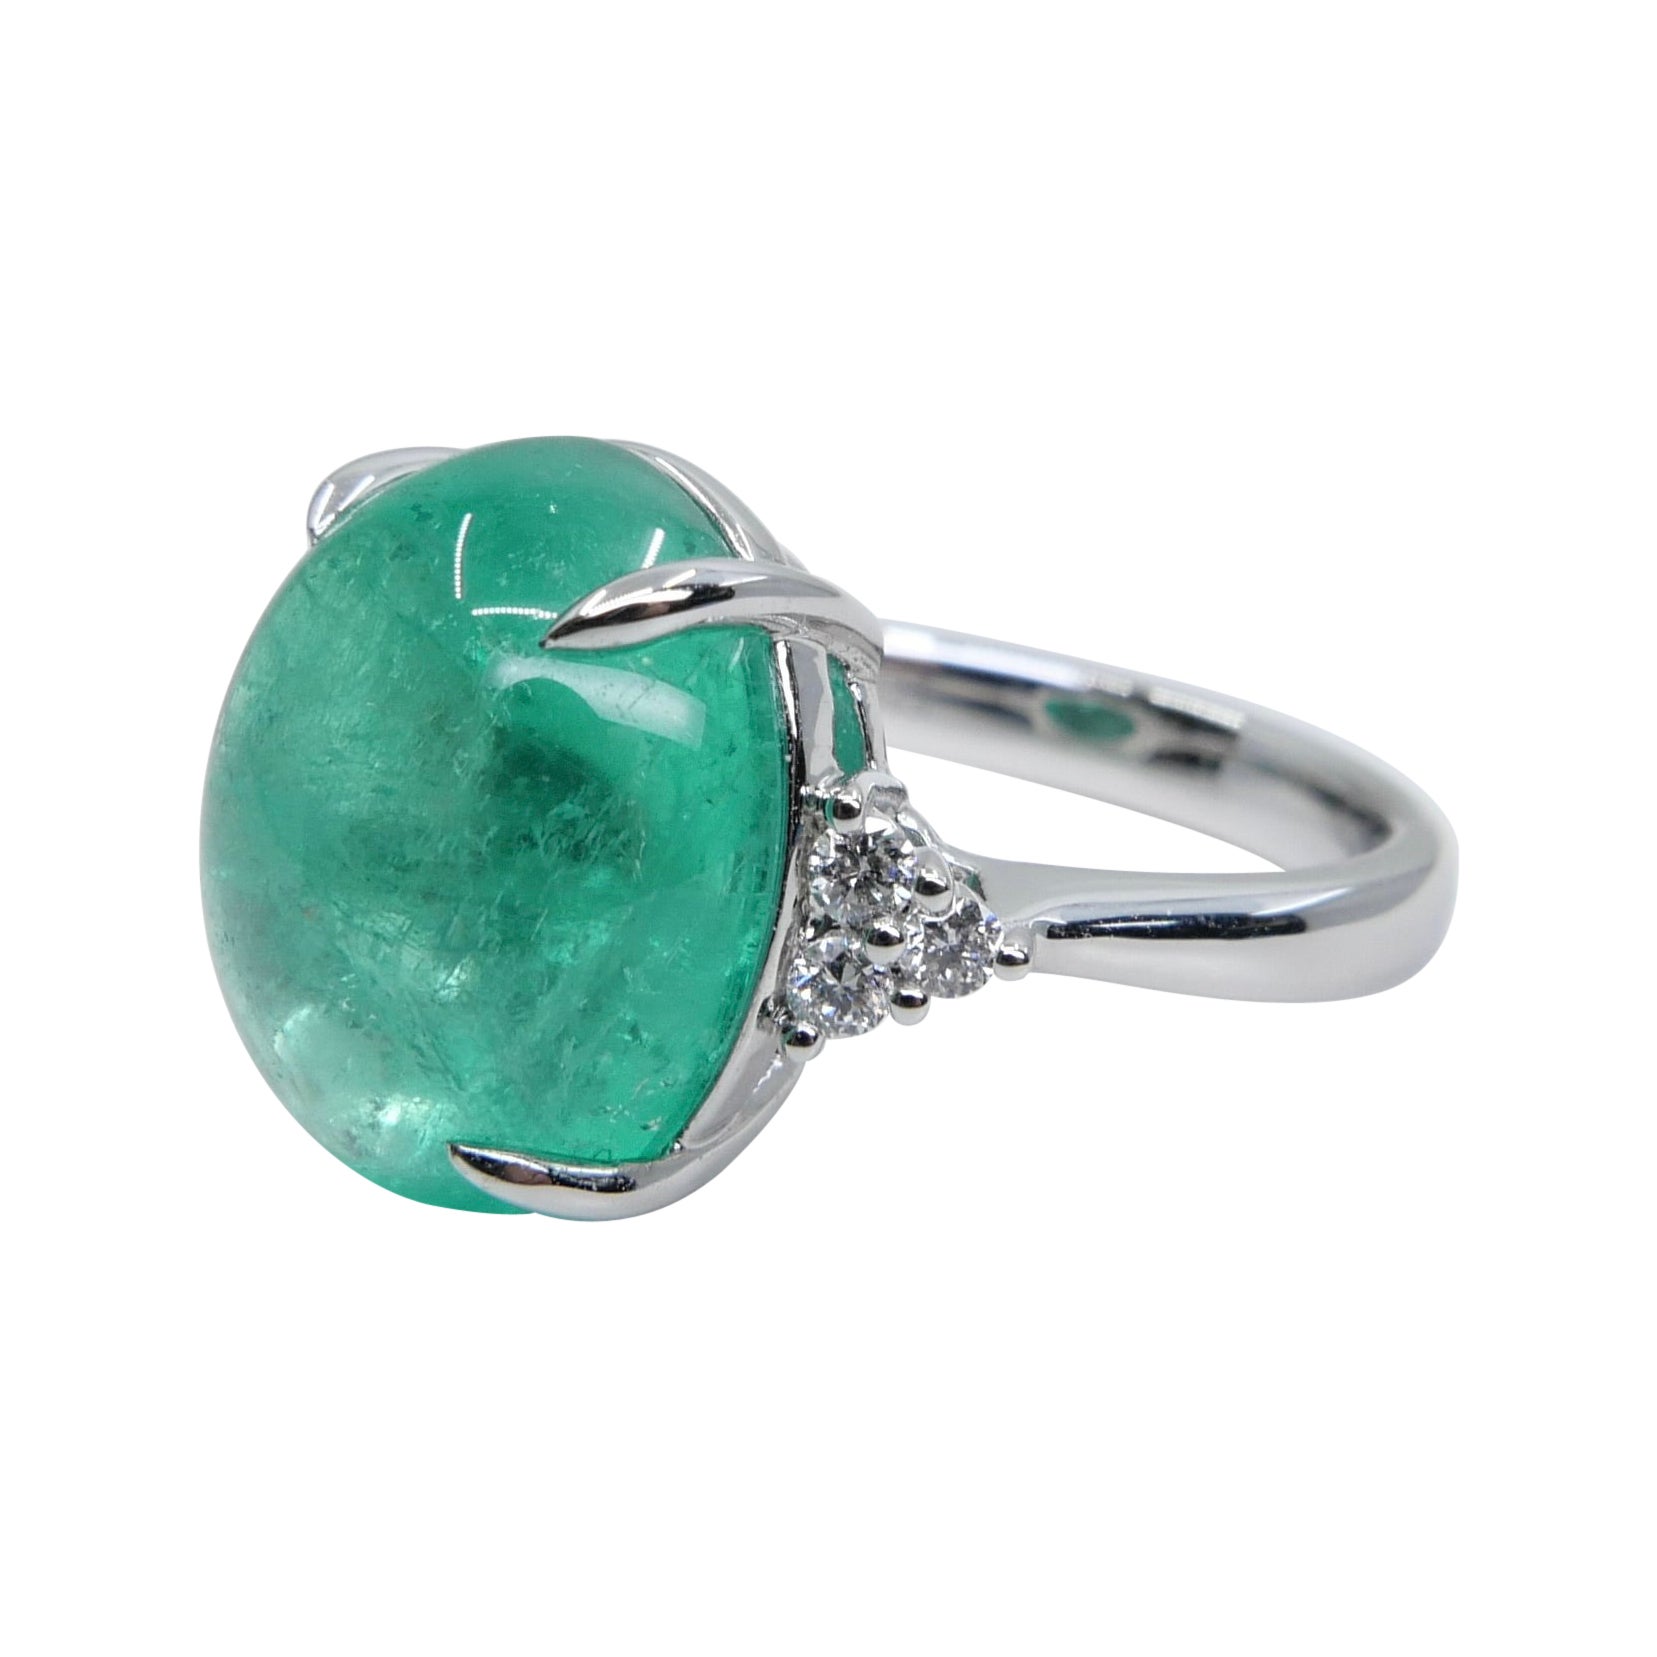 GRS Certified 10.06 Cts Columbian Minor Emerald Ring. Large Statement Ring For Sale